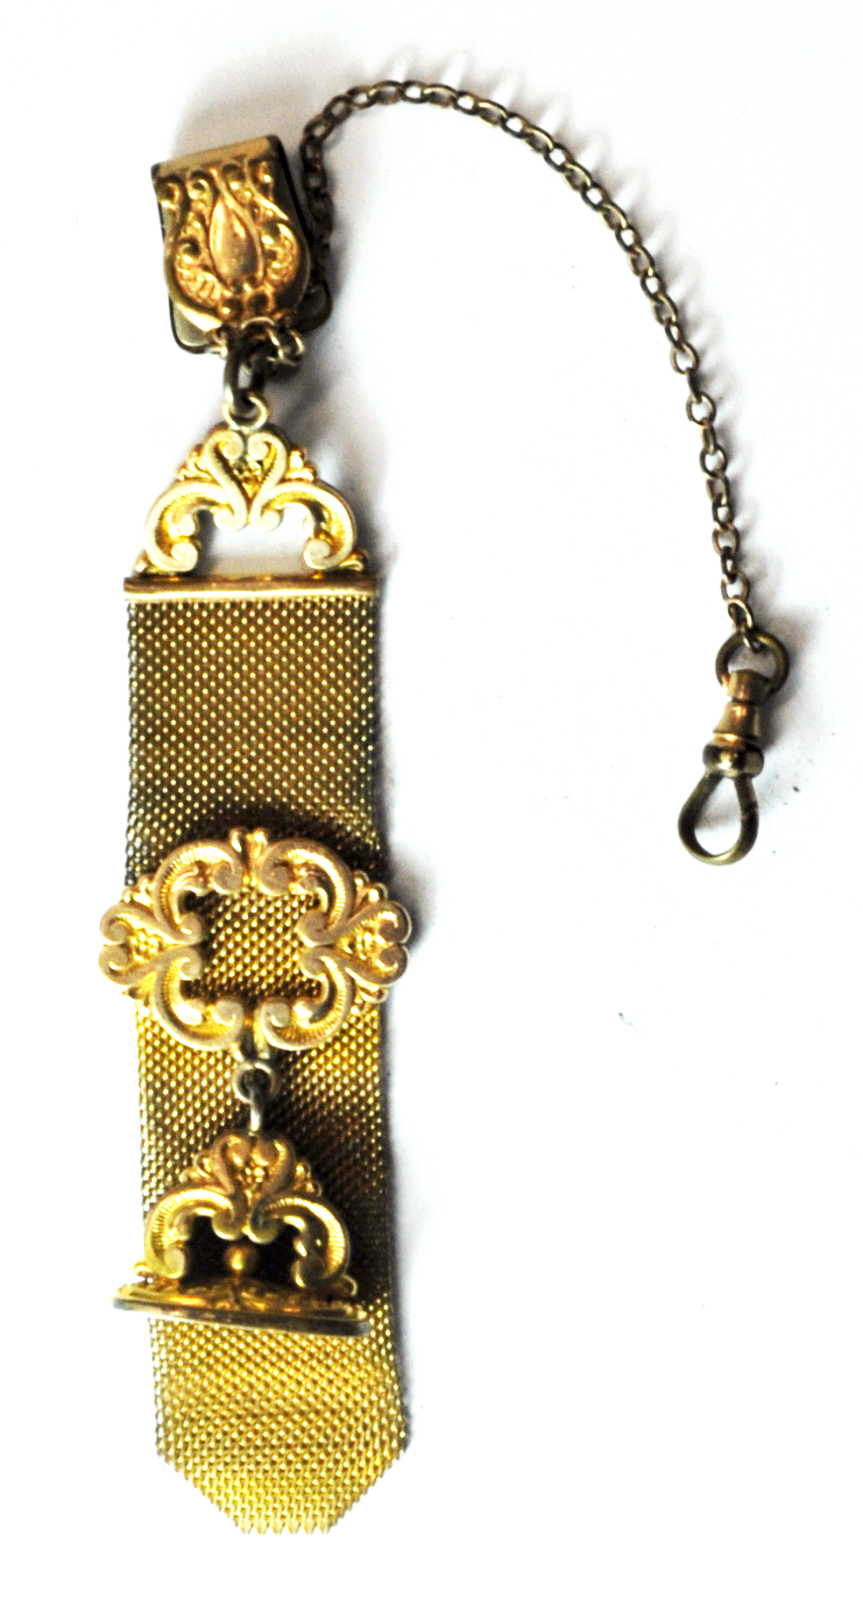 Gold Filled Victorian Pocket Watch 2.5mm Chain Fob Clip 28mm Wide 8-3/4"